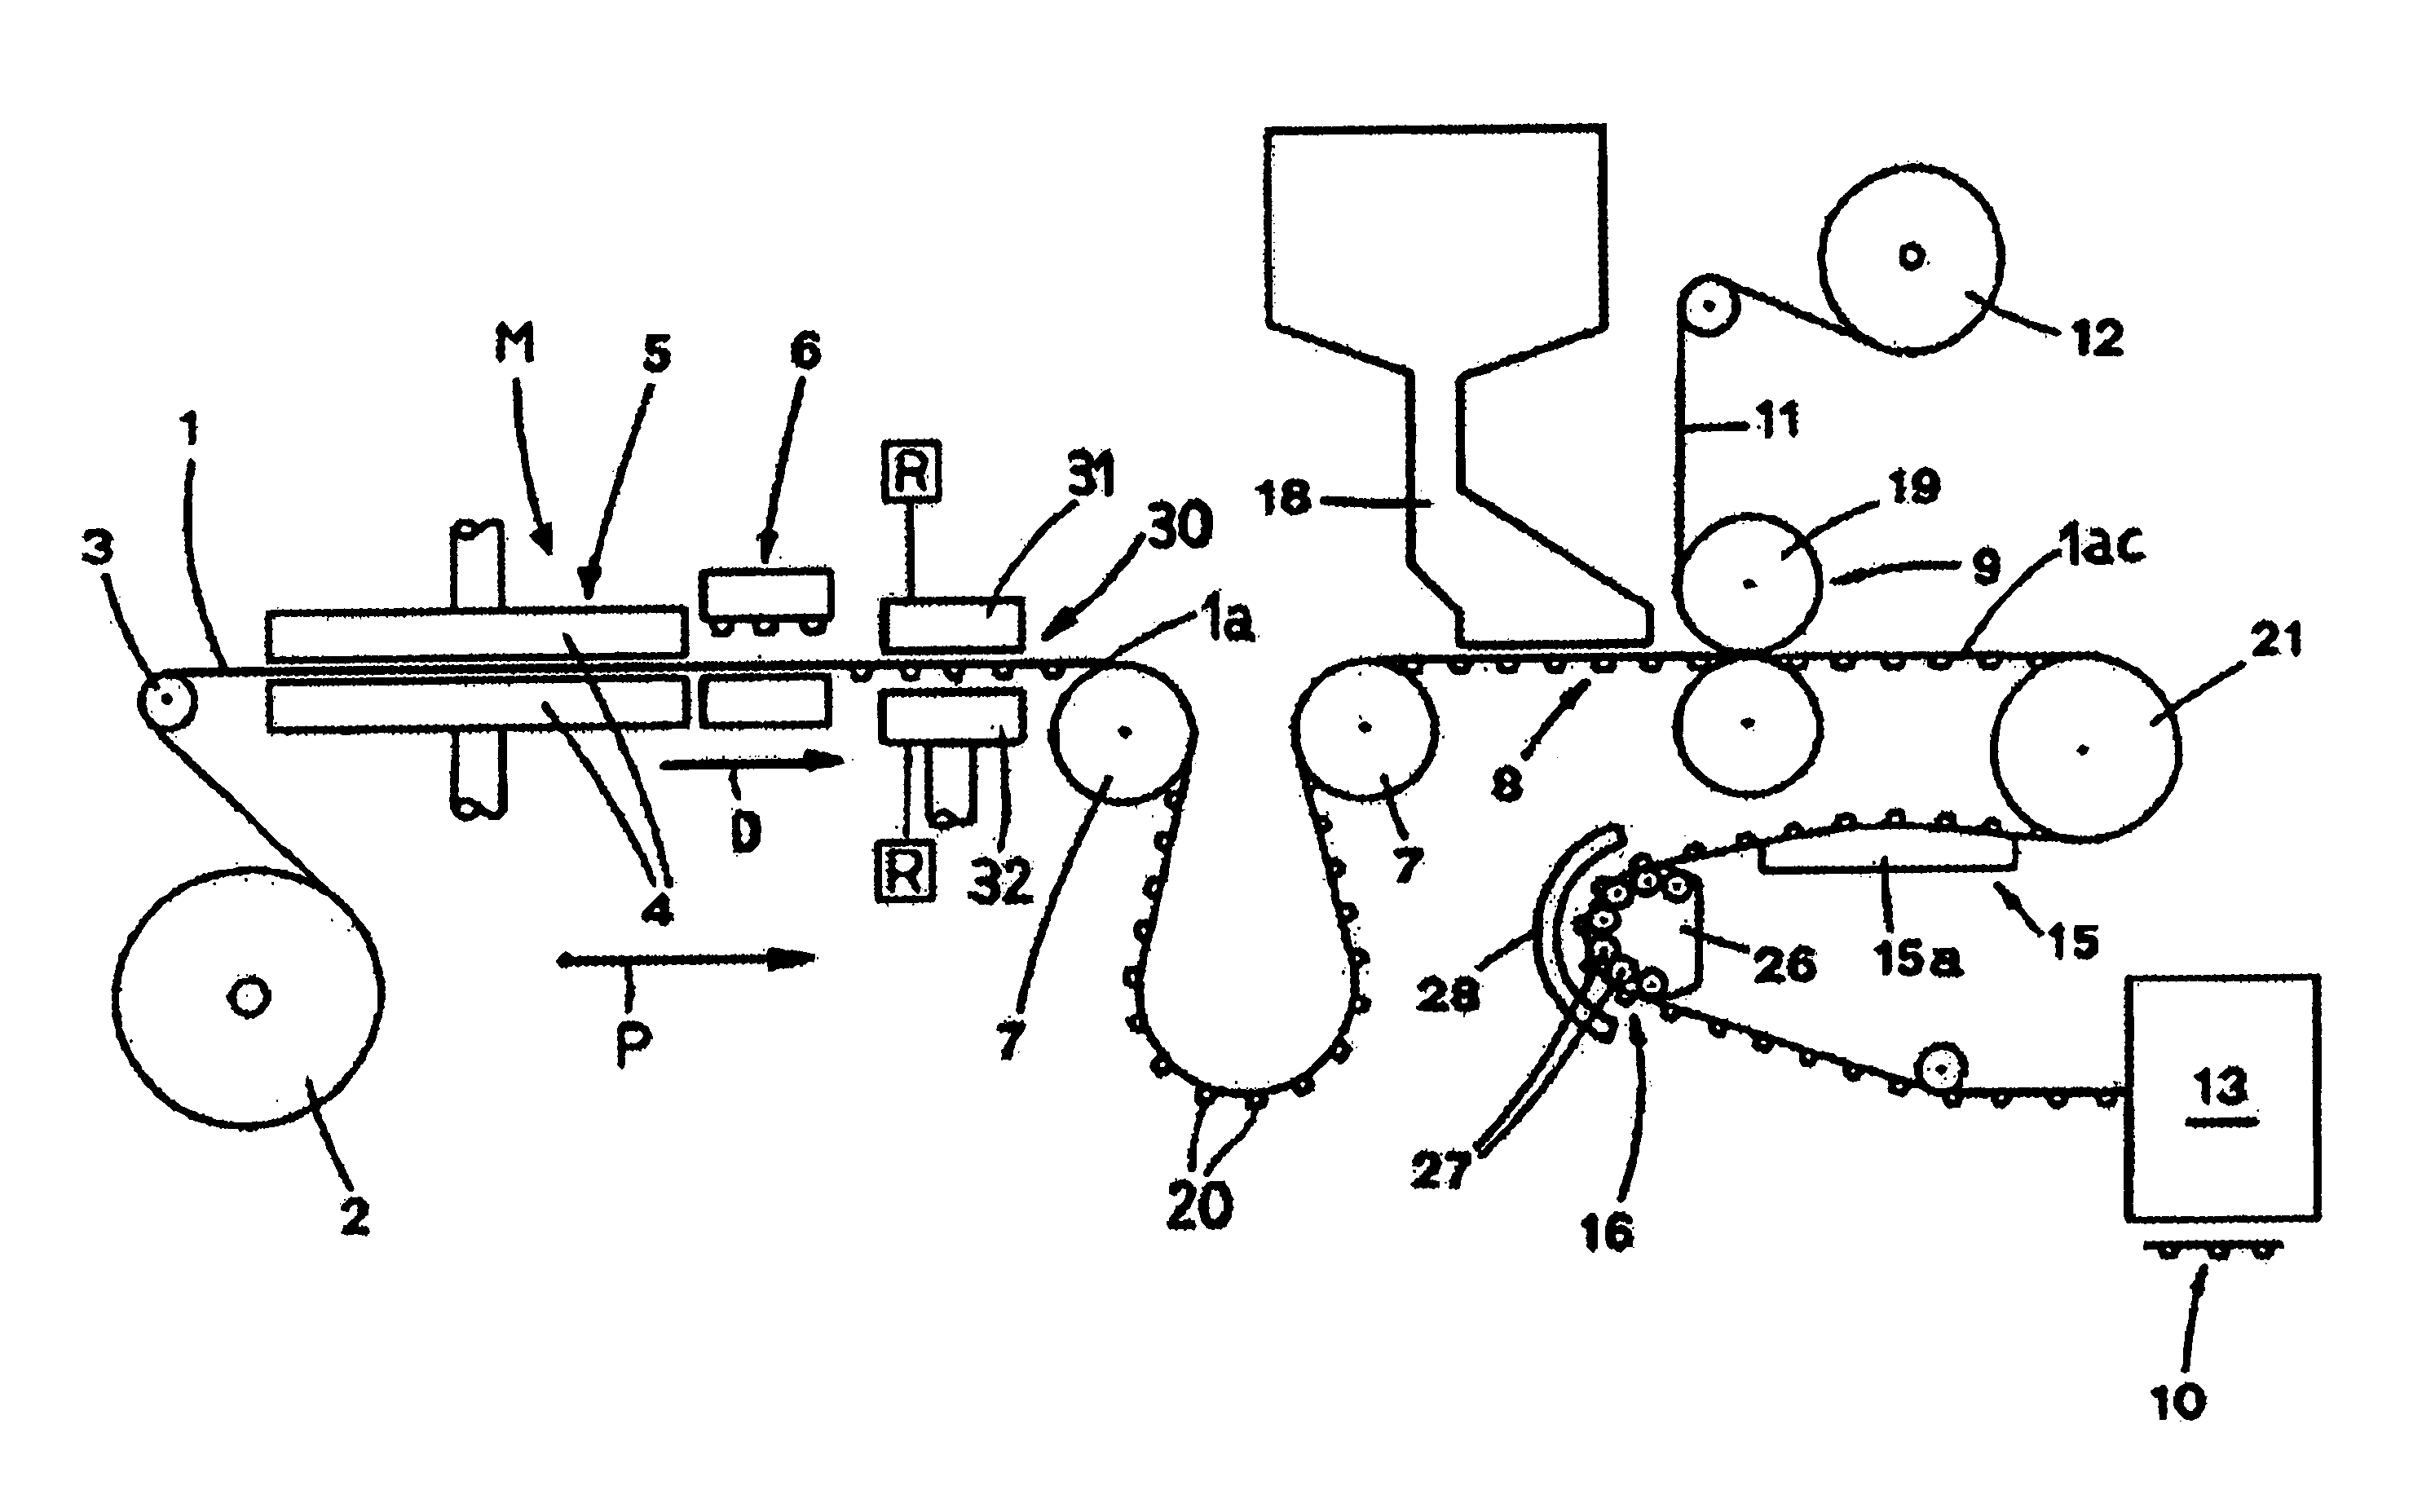 Method and machine for producing blister packs